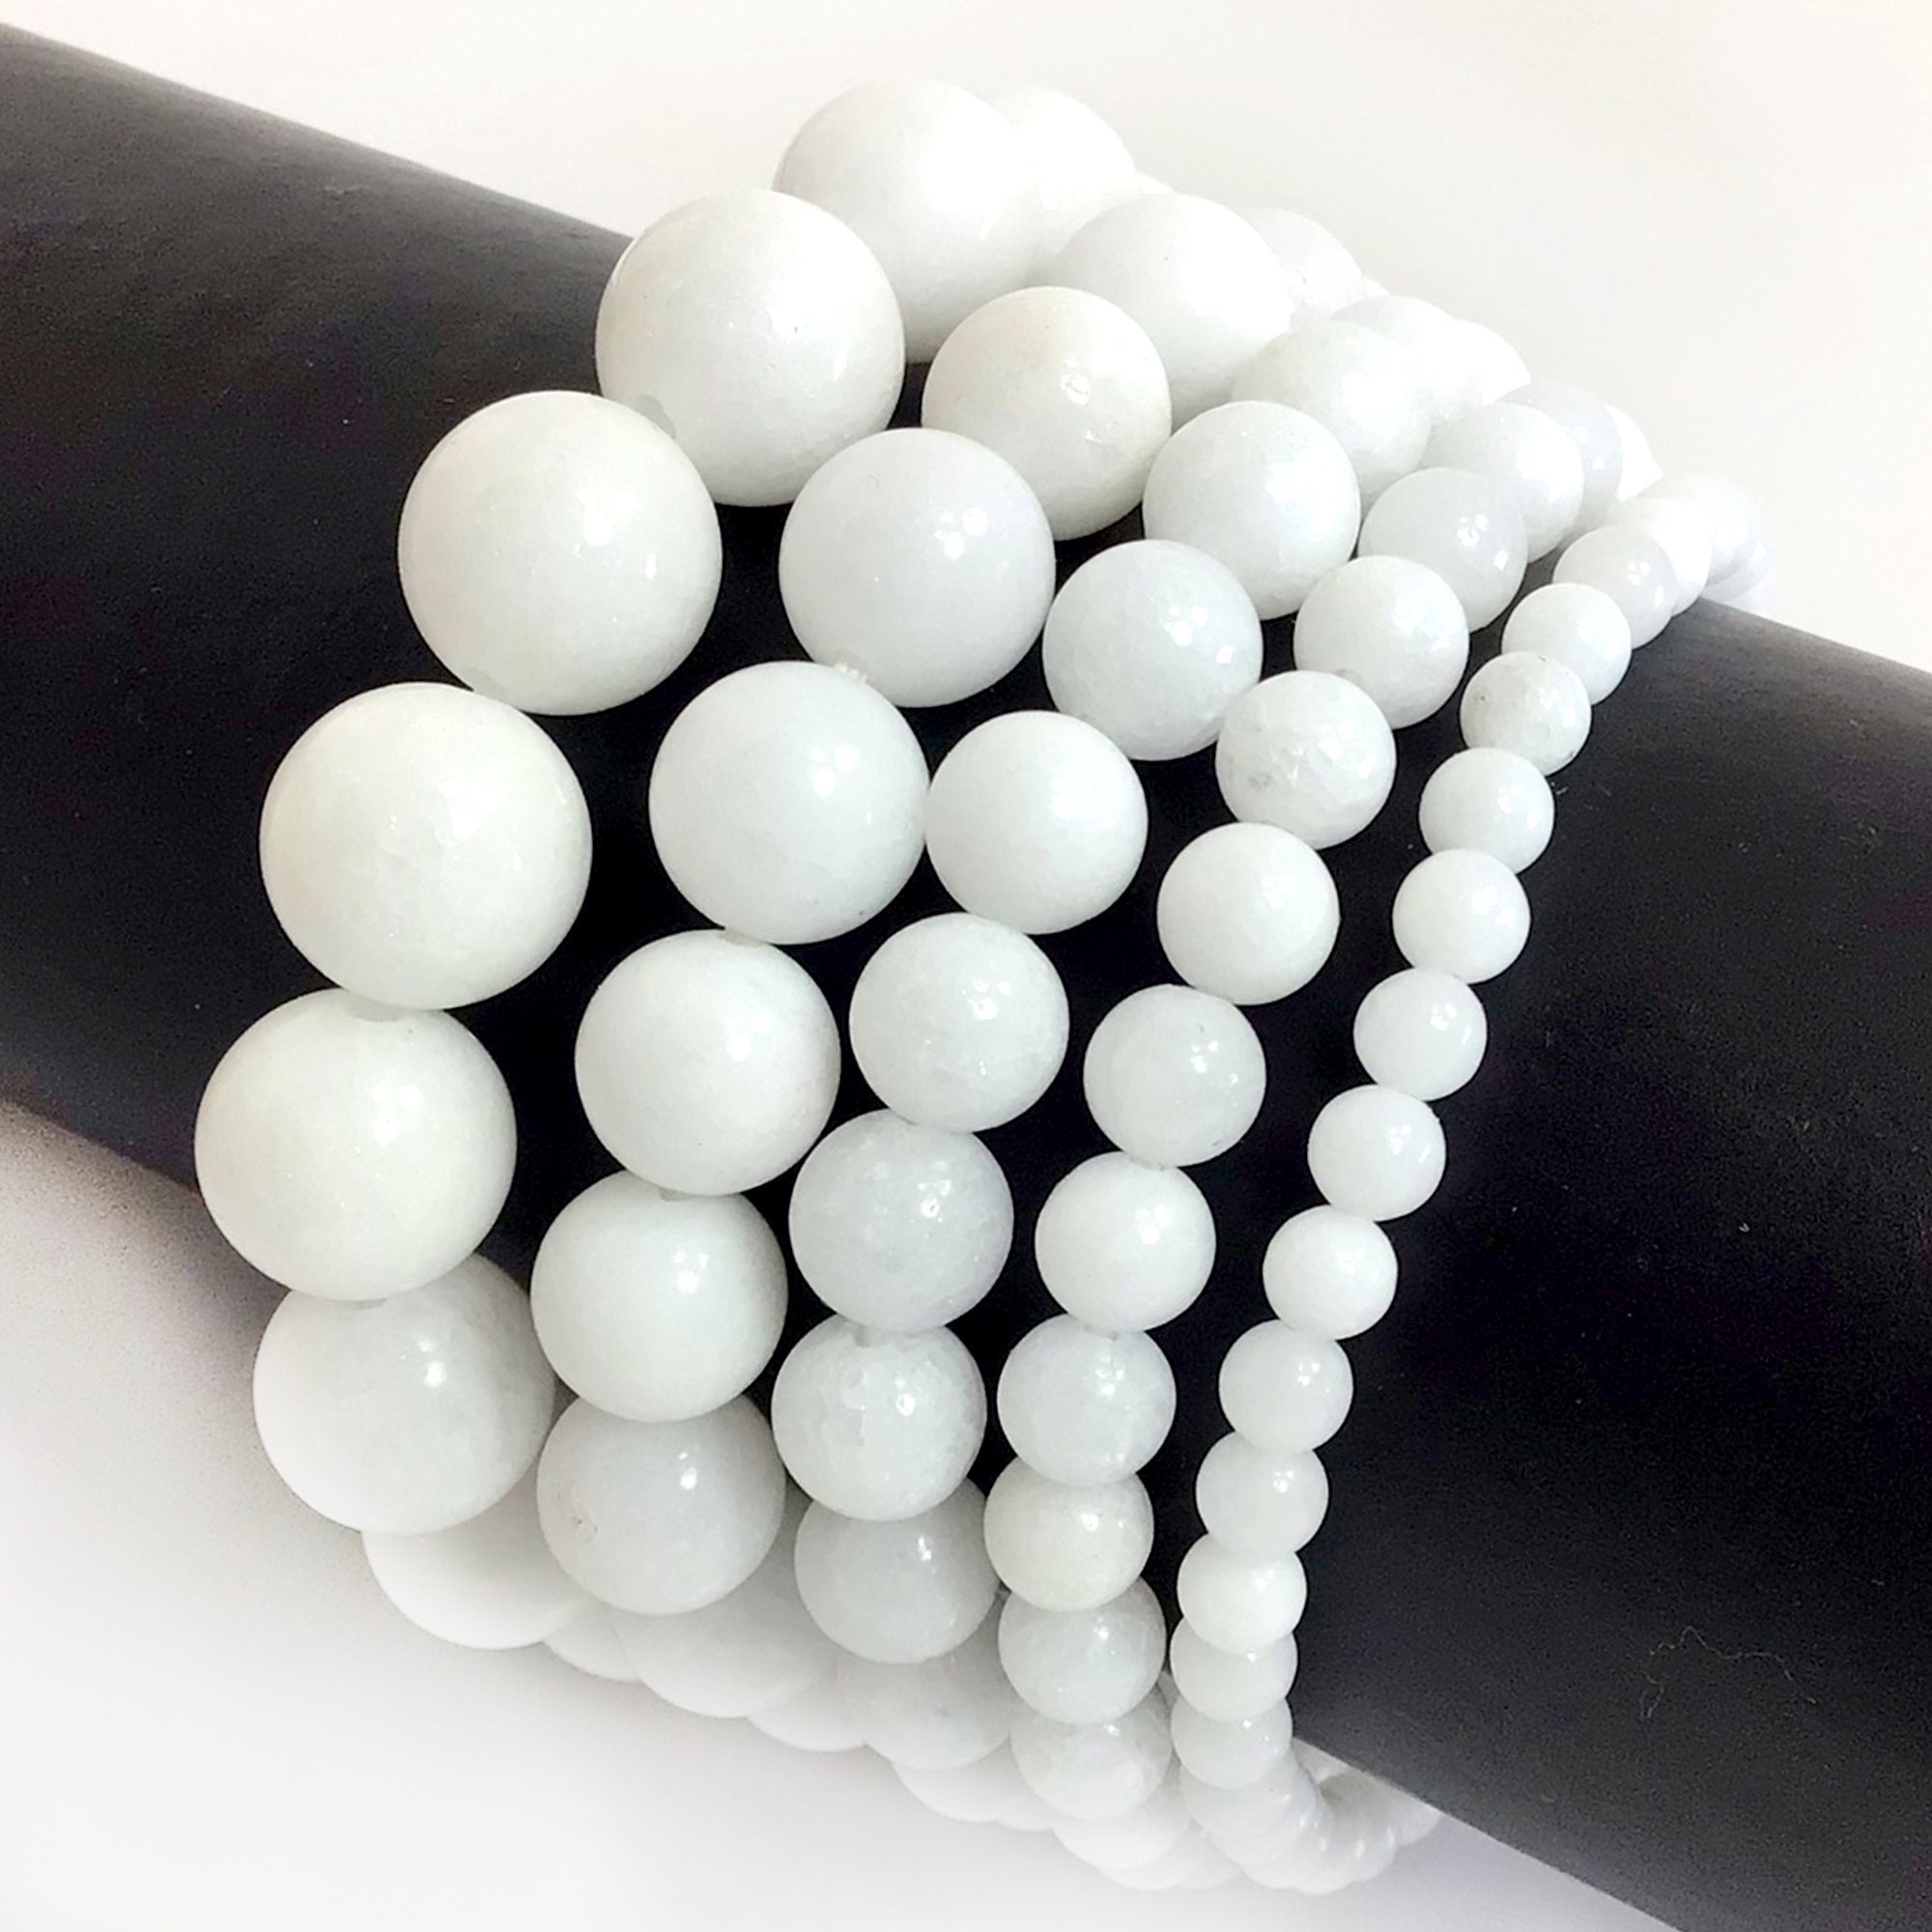 White Marble Howlite Stone Bead Bracelet with Bronze Spacers - 10mm